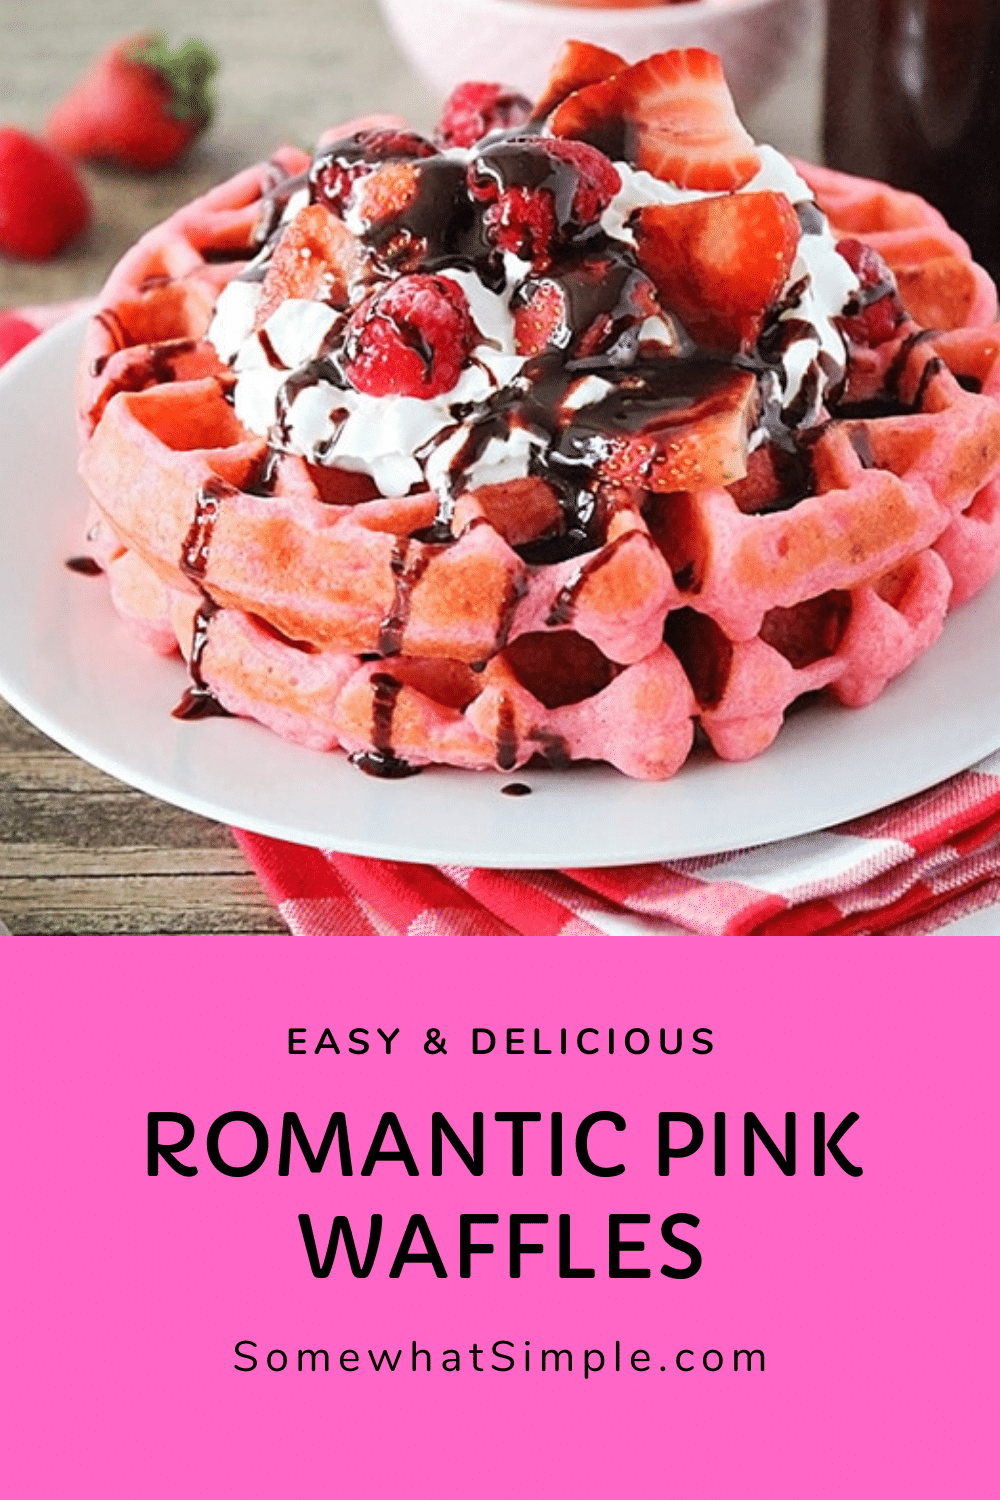 These pink velvet waffles are so fun for Valentine's Day, and so quick and easy to make! Who would love a delicious pink waffle to celebrate any romantic occasion. These waffles turn out soft and fluffy every time! via @somewhatsimple